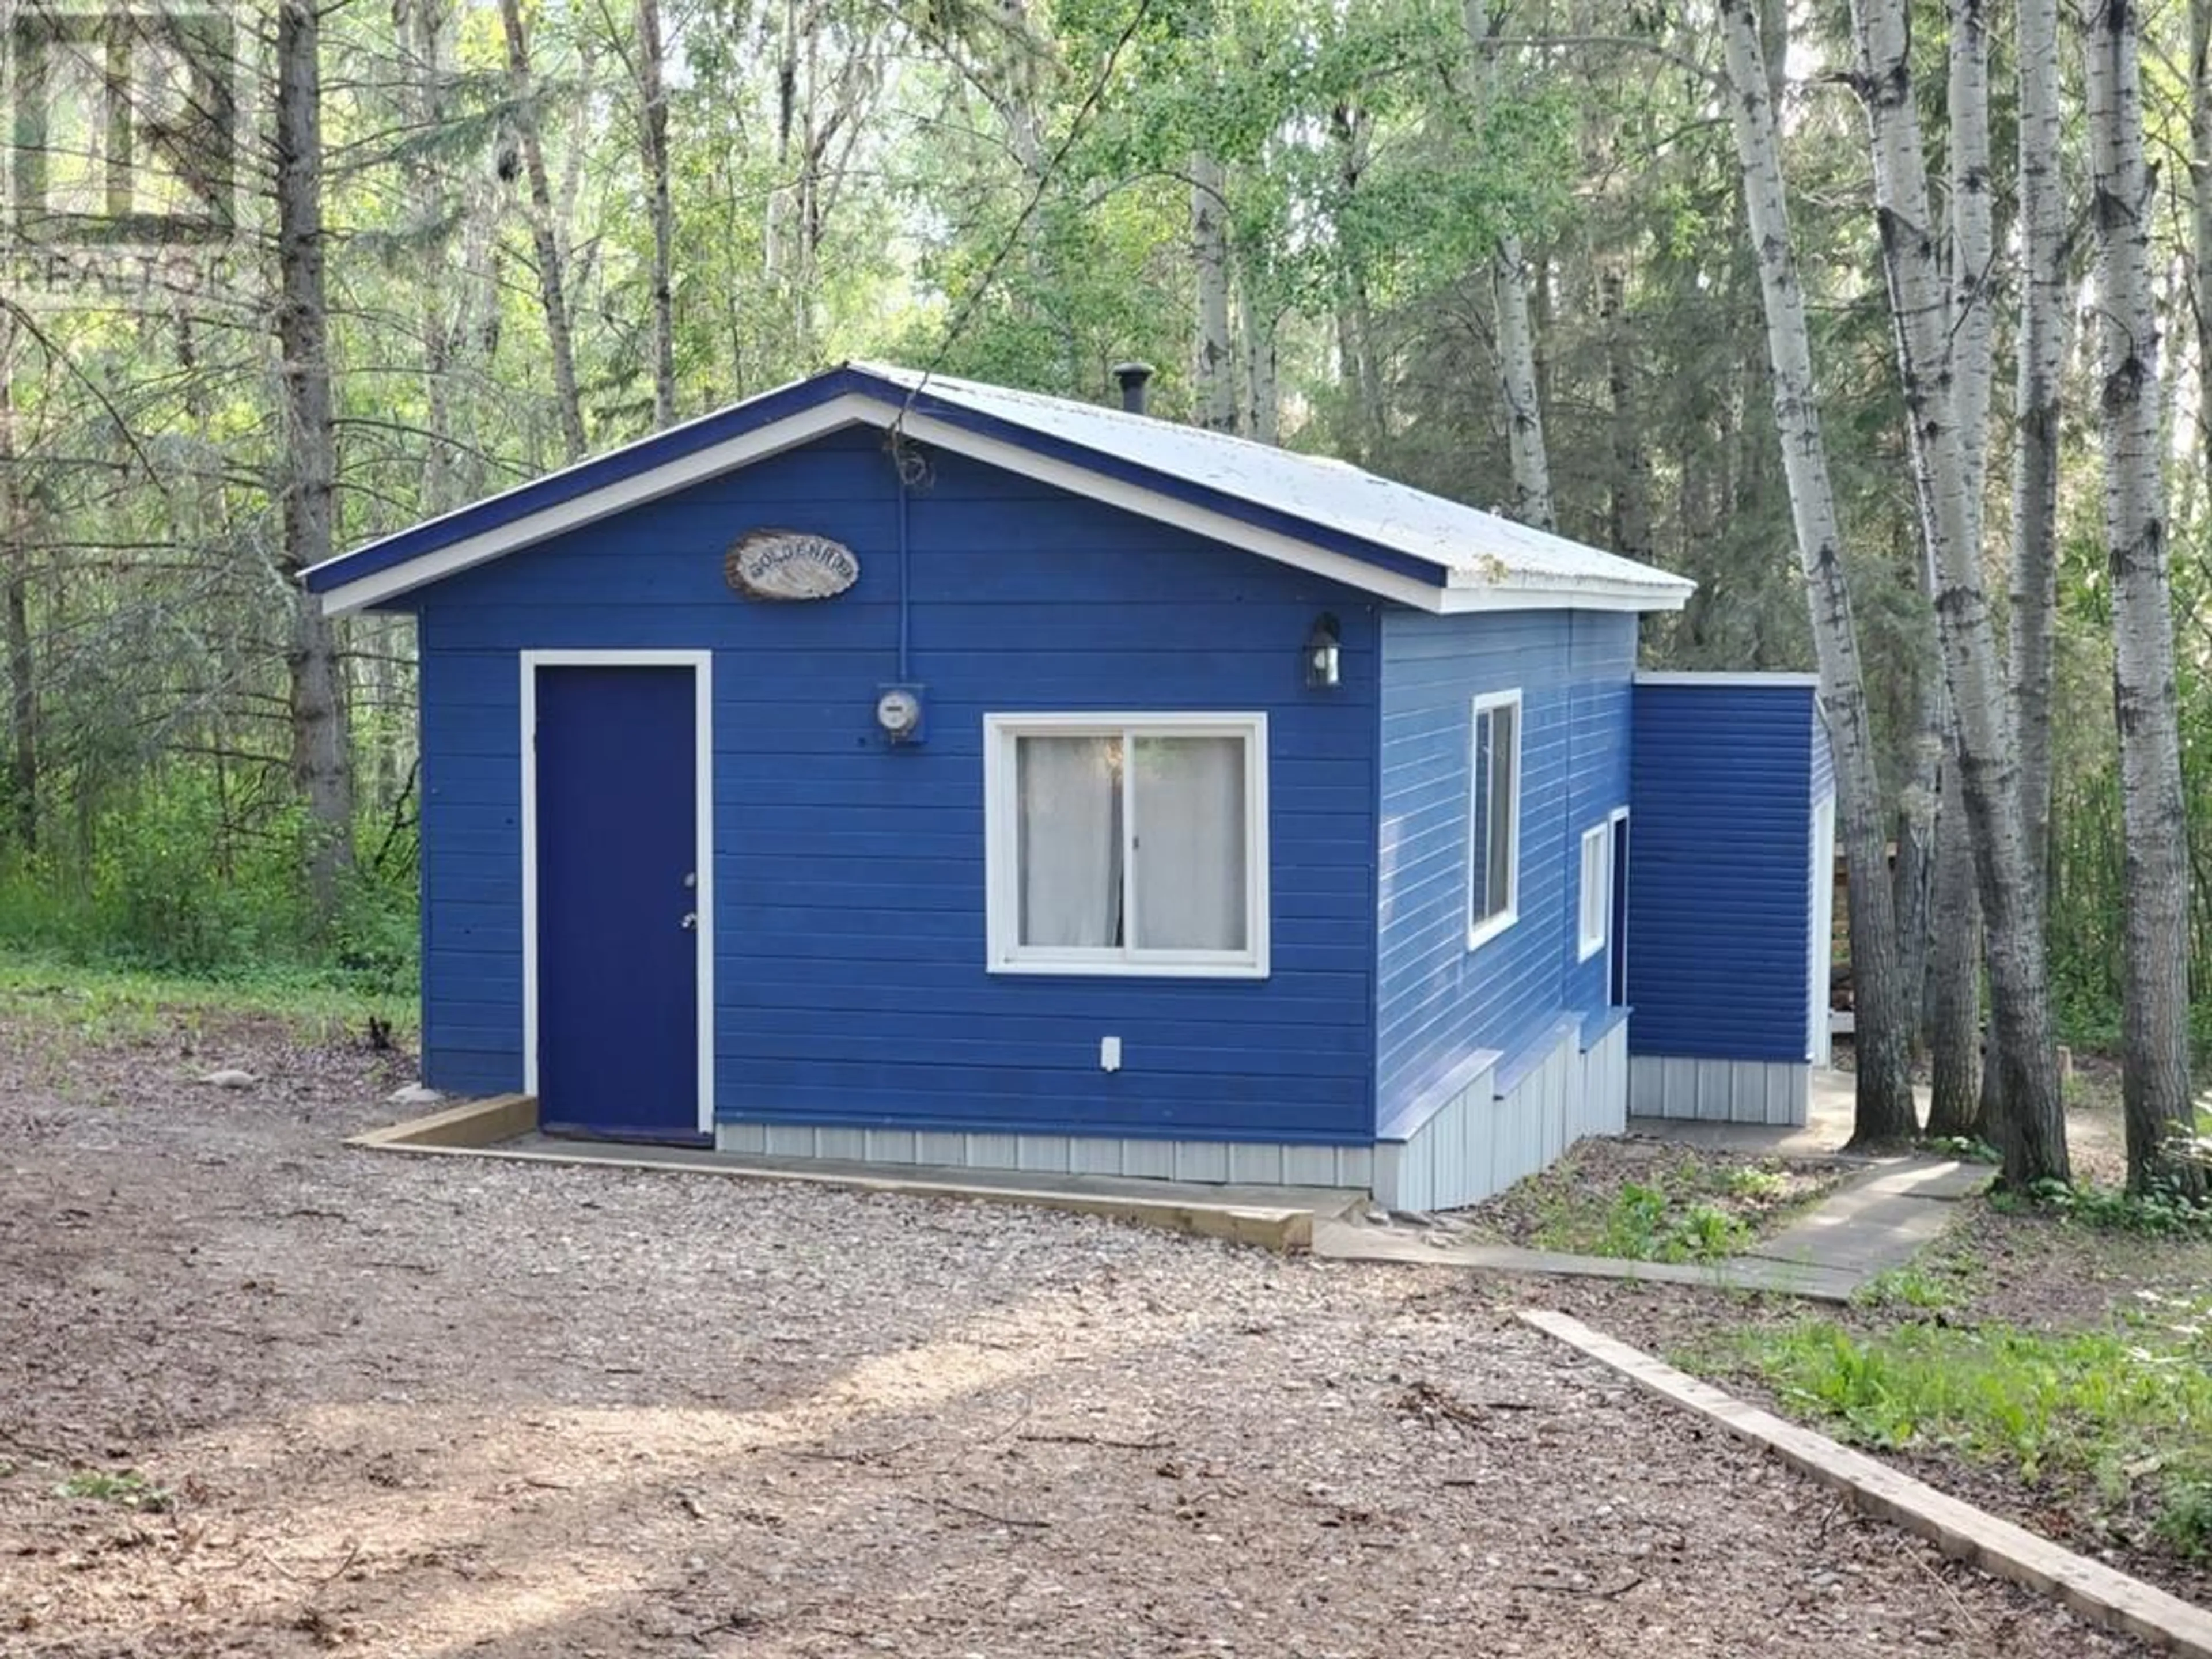 Shed for 229 15538 Old Trail Road, Plamondon Alberta T0A2T0